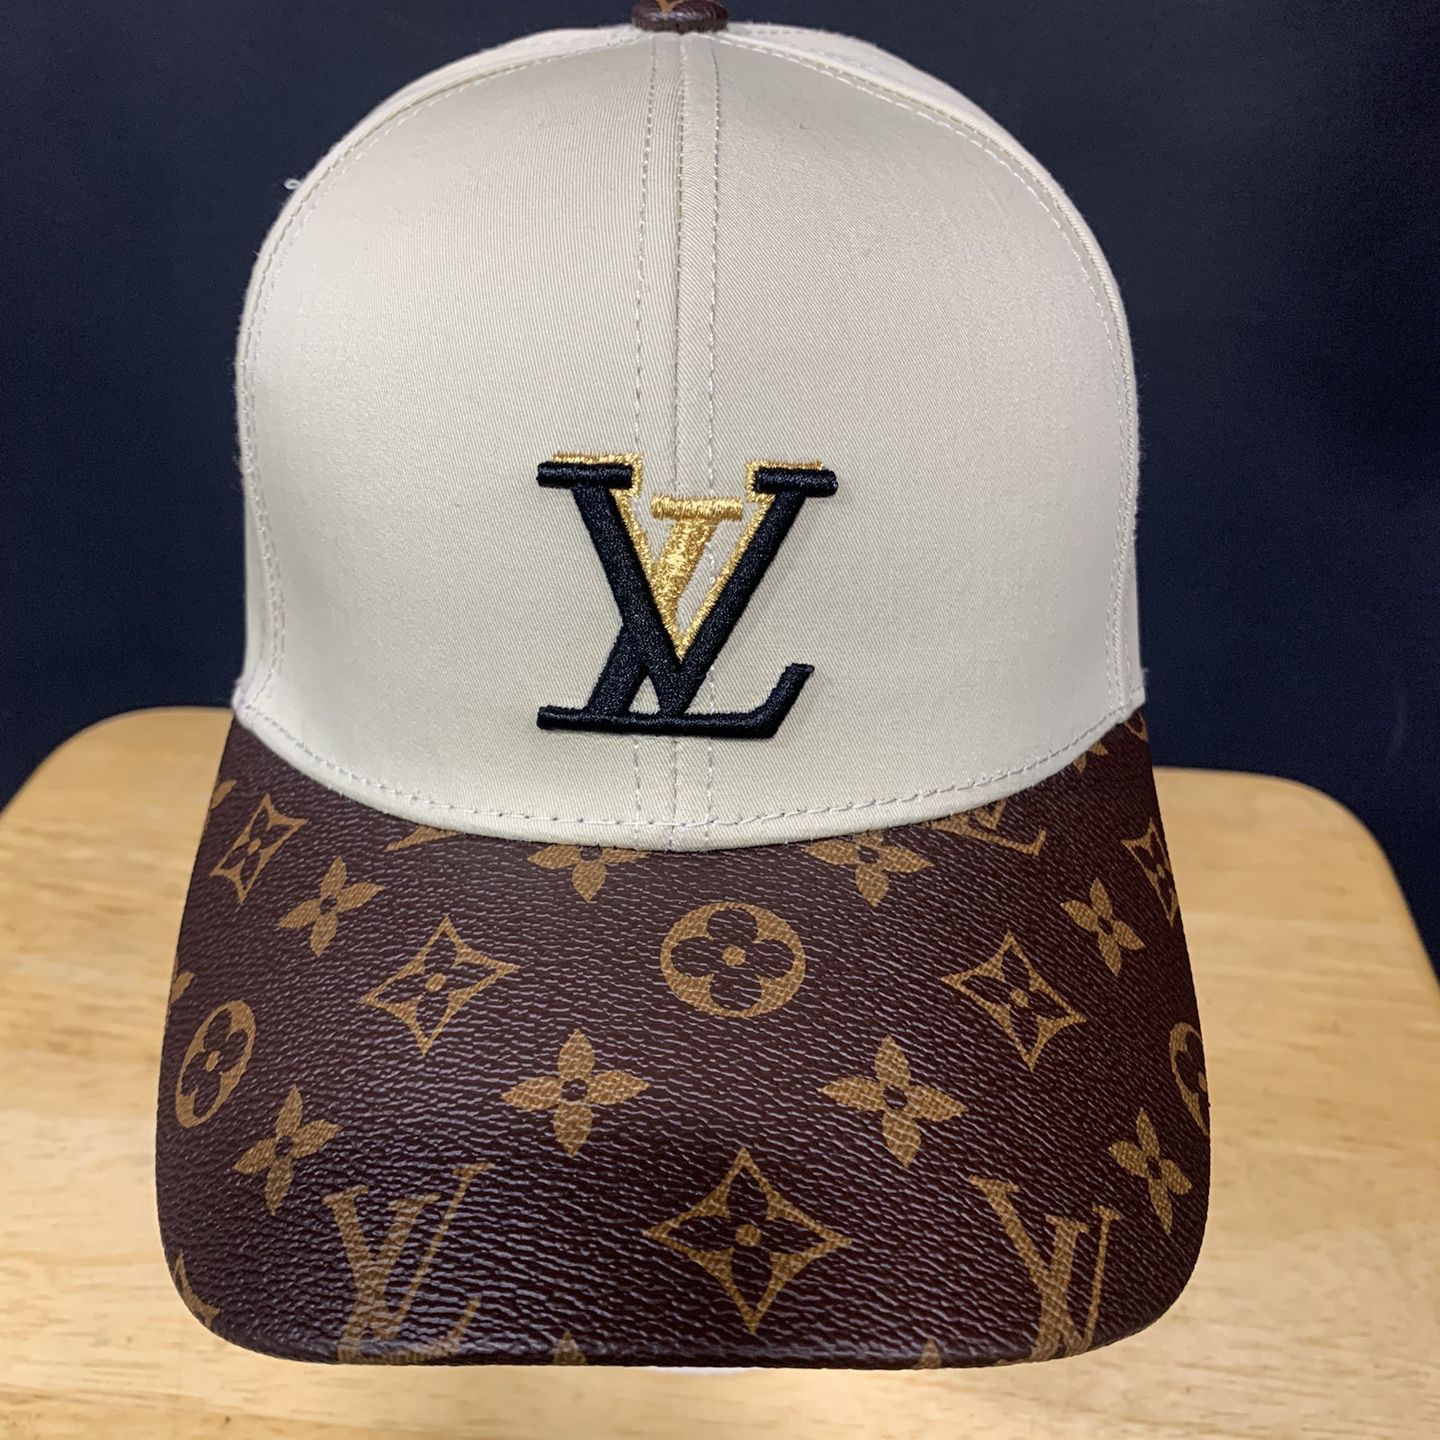 Lv hats for Sale in Brooklyn, NY - OfferUp